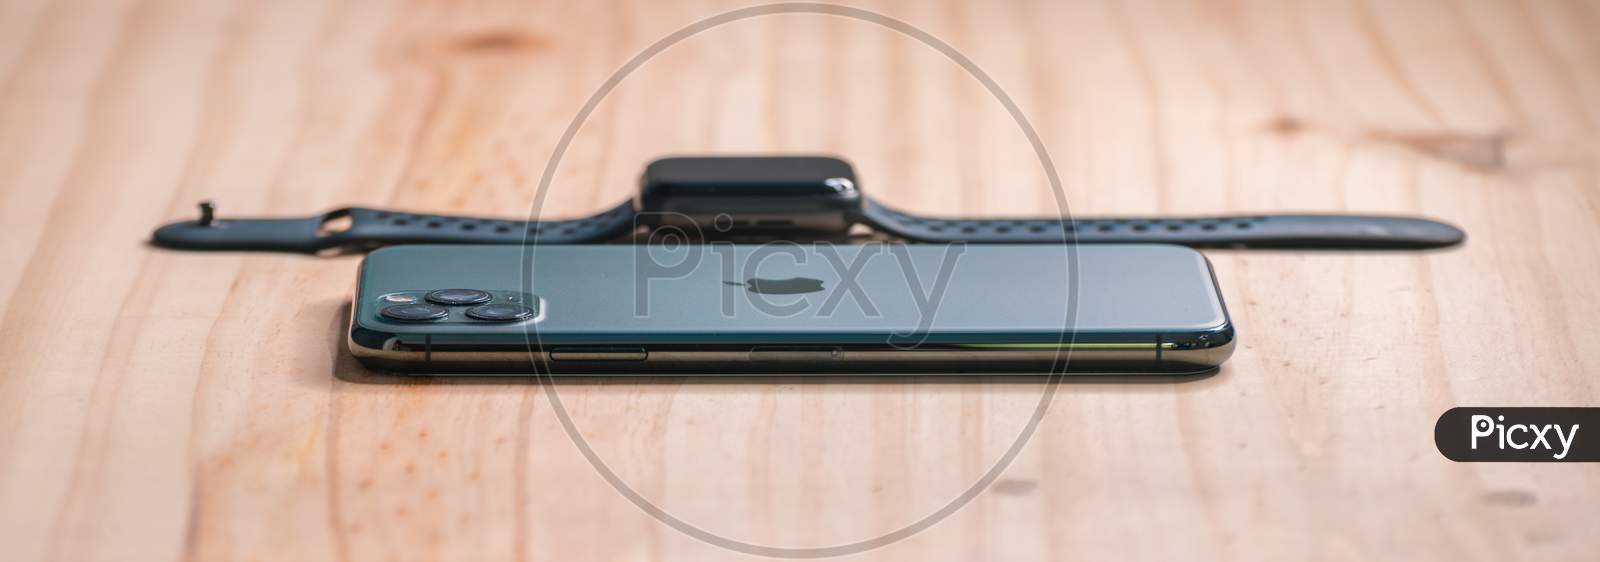 Galle, Sri Lanka - 02 19 2021: Apple Iphone 11 Pro Max And Apple Watch Series 6 Lay Flat On A Wooden Table With Low Angle Side View, Luxury And Lifestyle Concept.